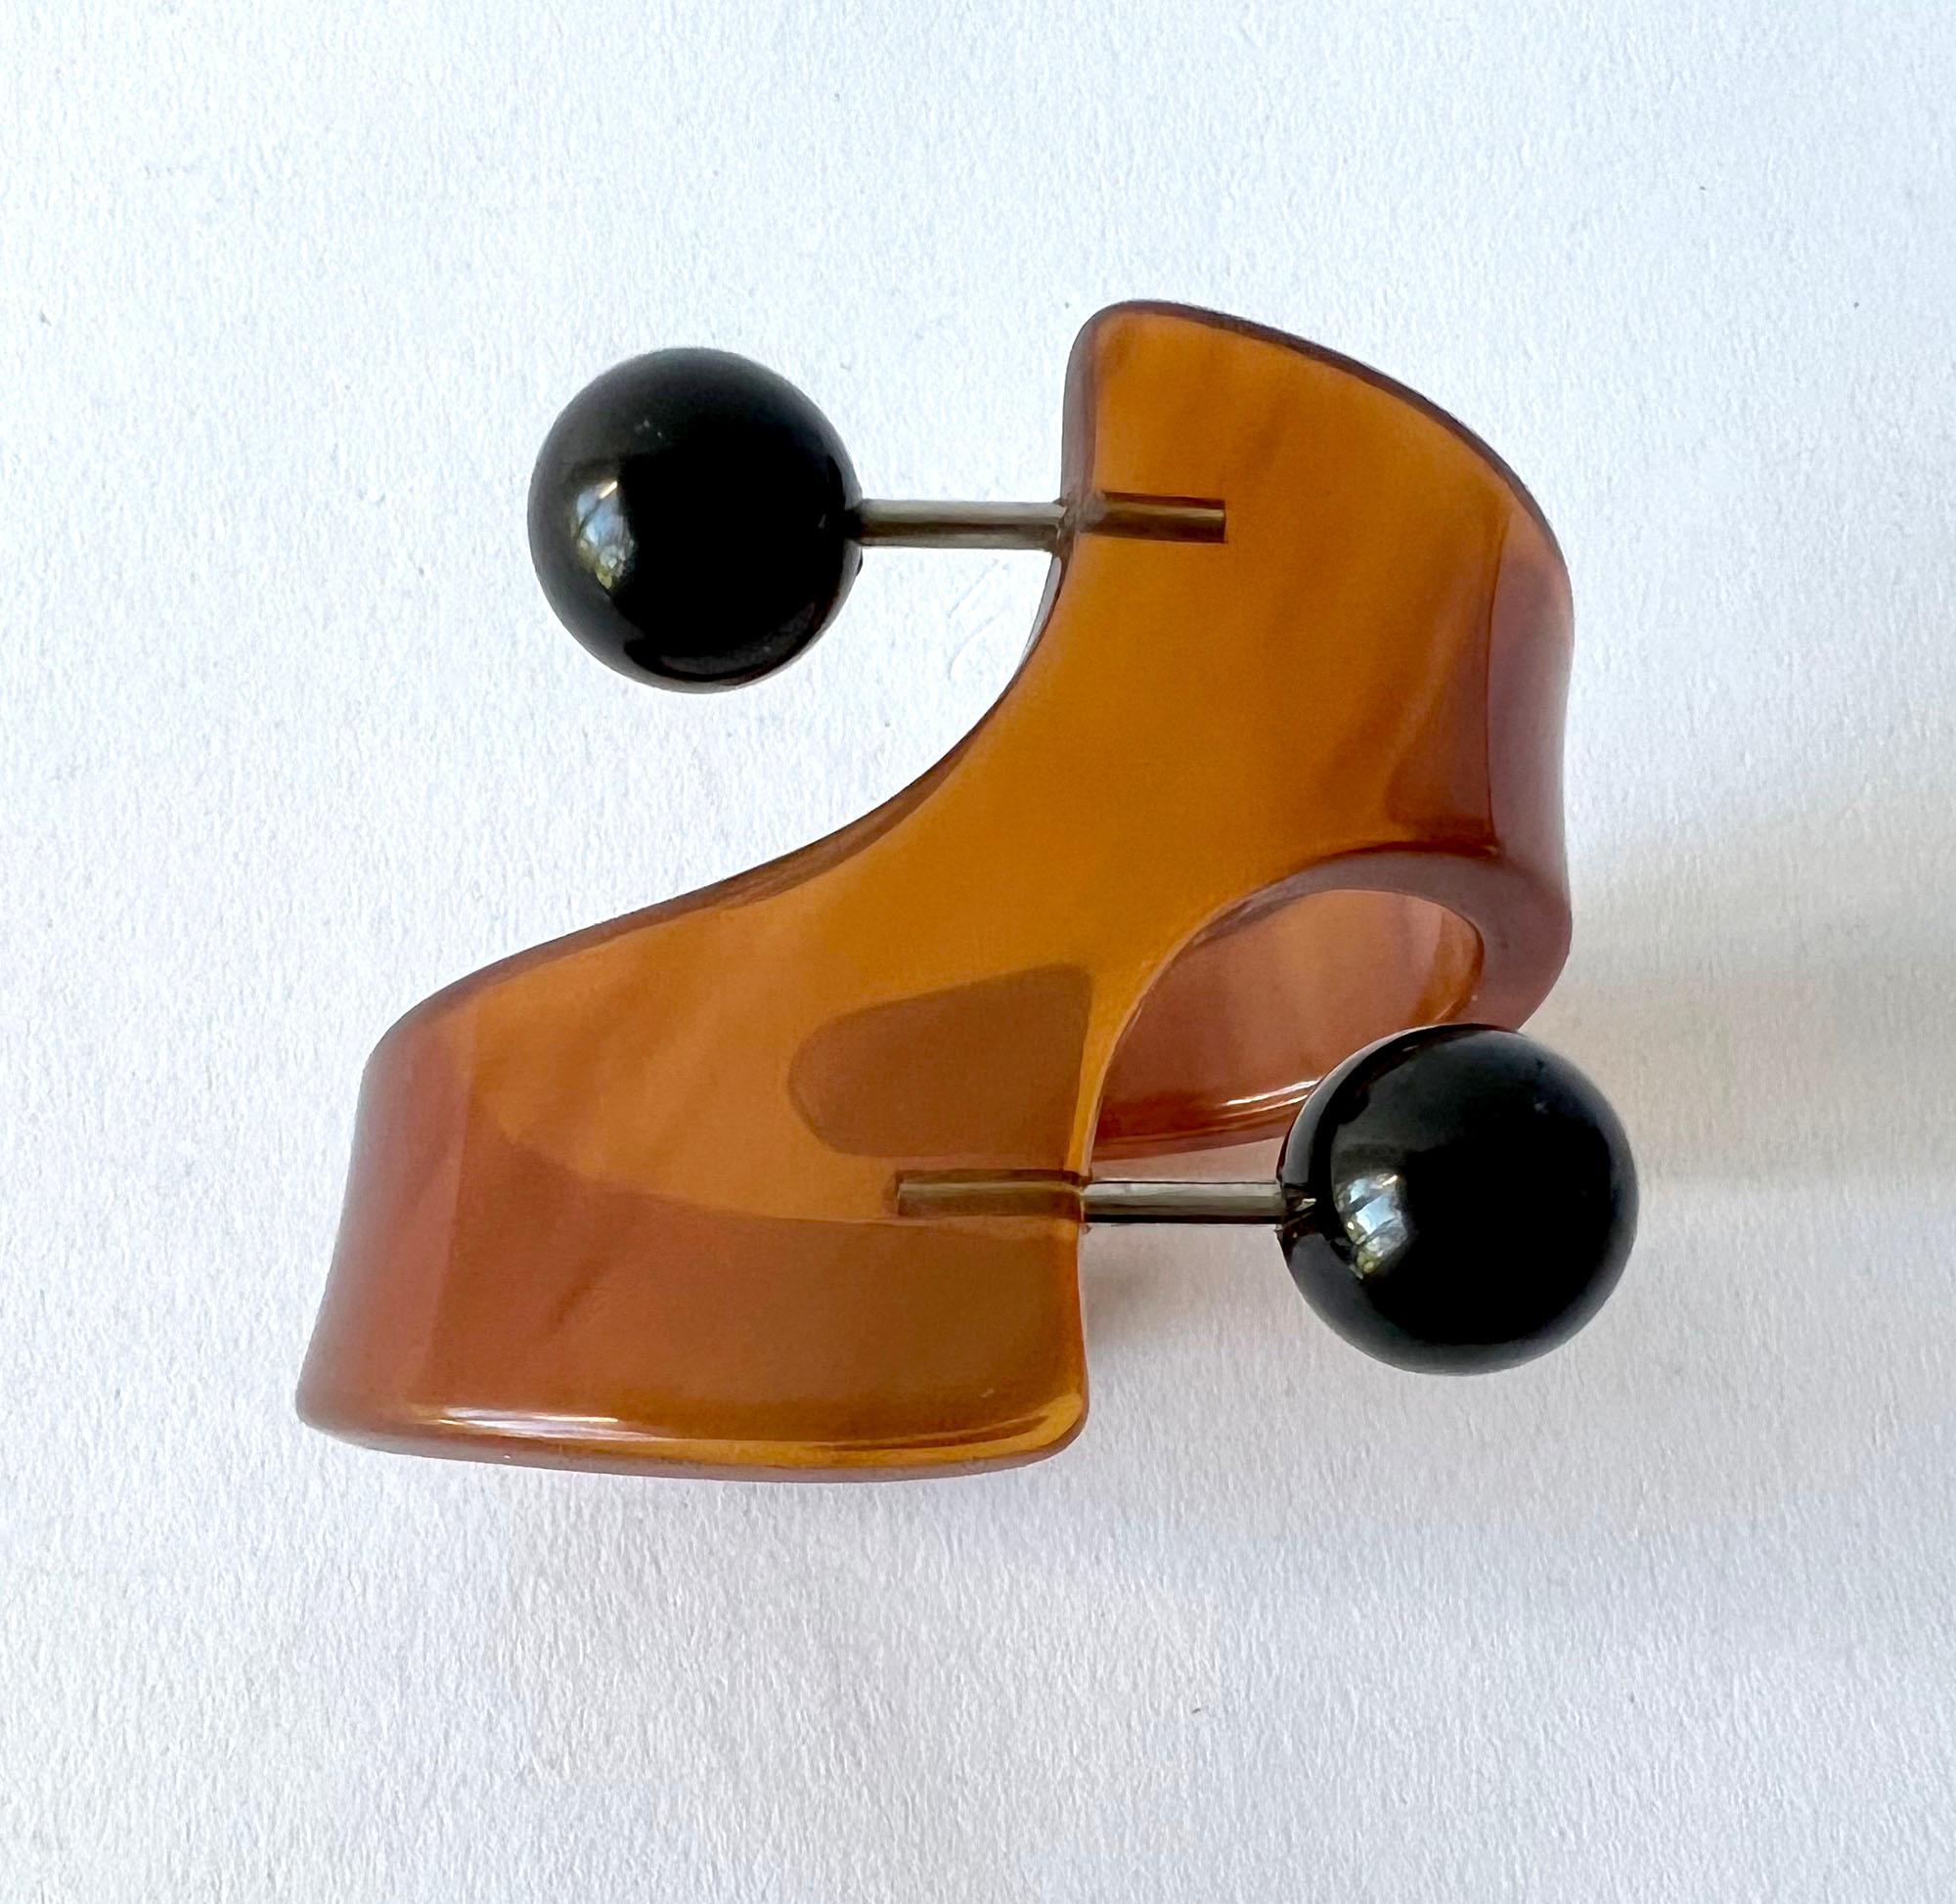 1980s Italian Post Modernist Acrylic Cuff Bracelet In Good Condition For Sale In Los Angeles, CA